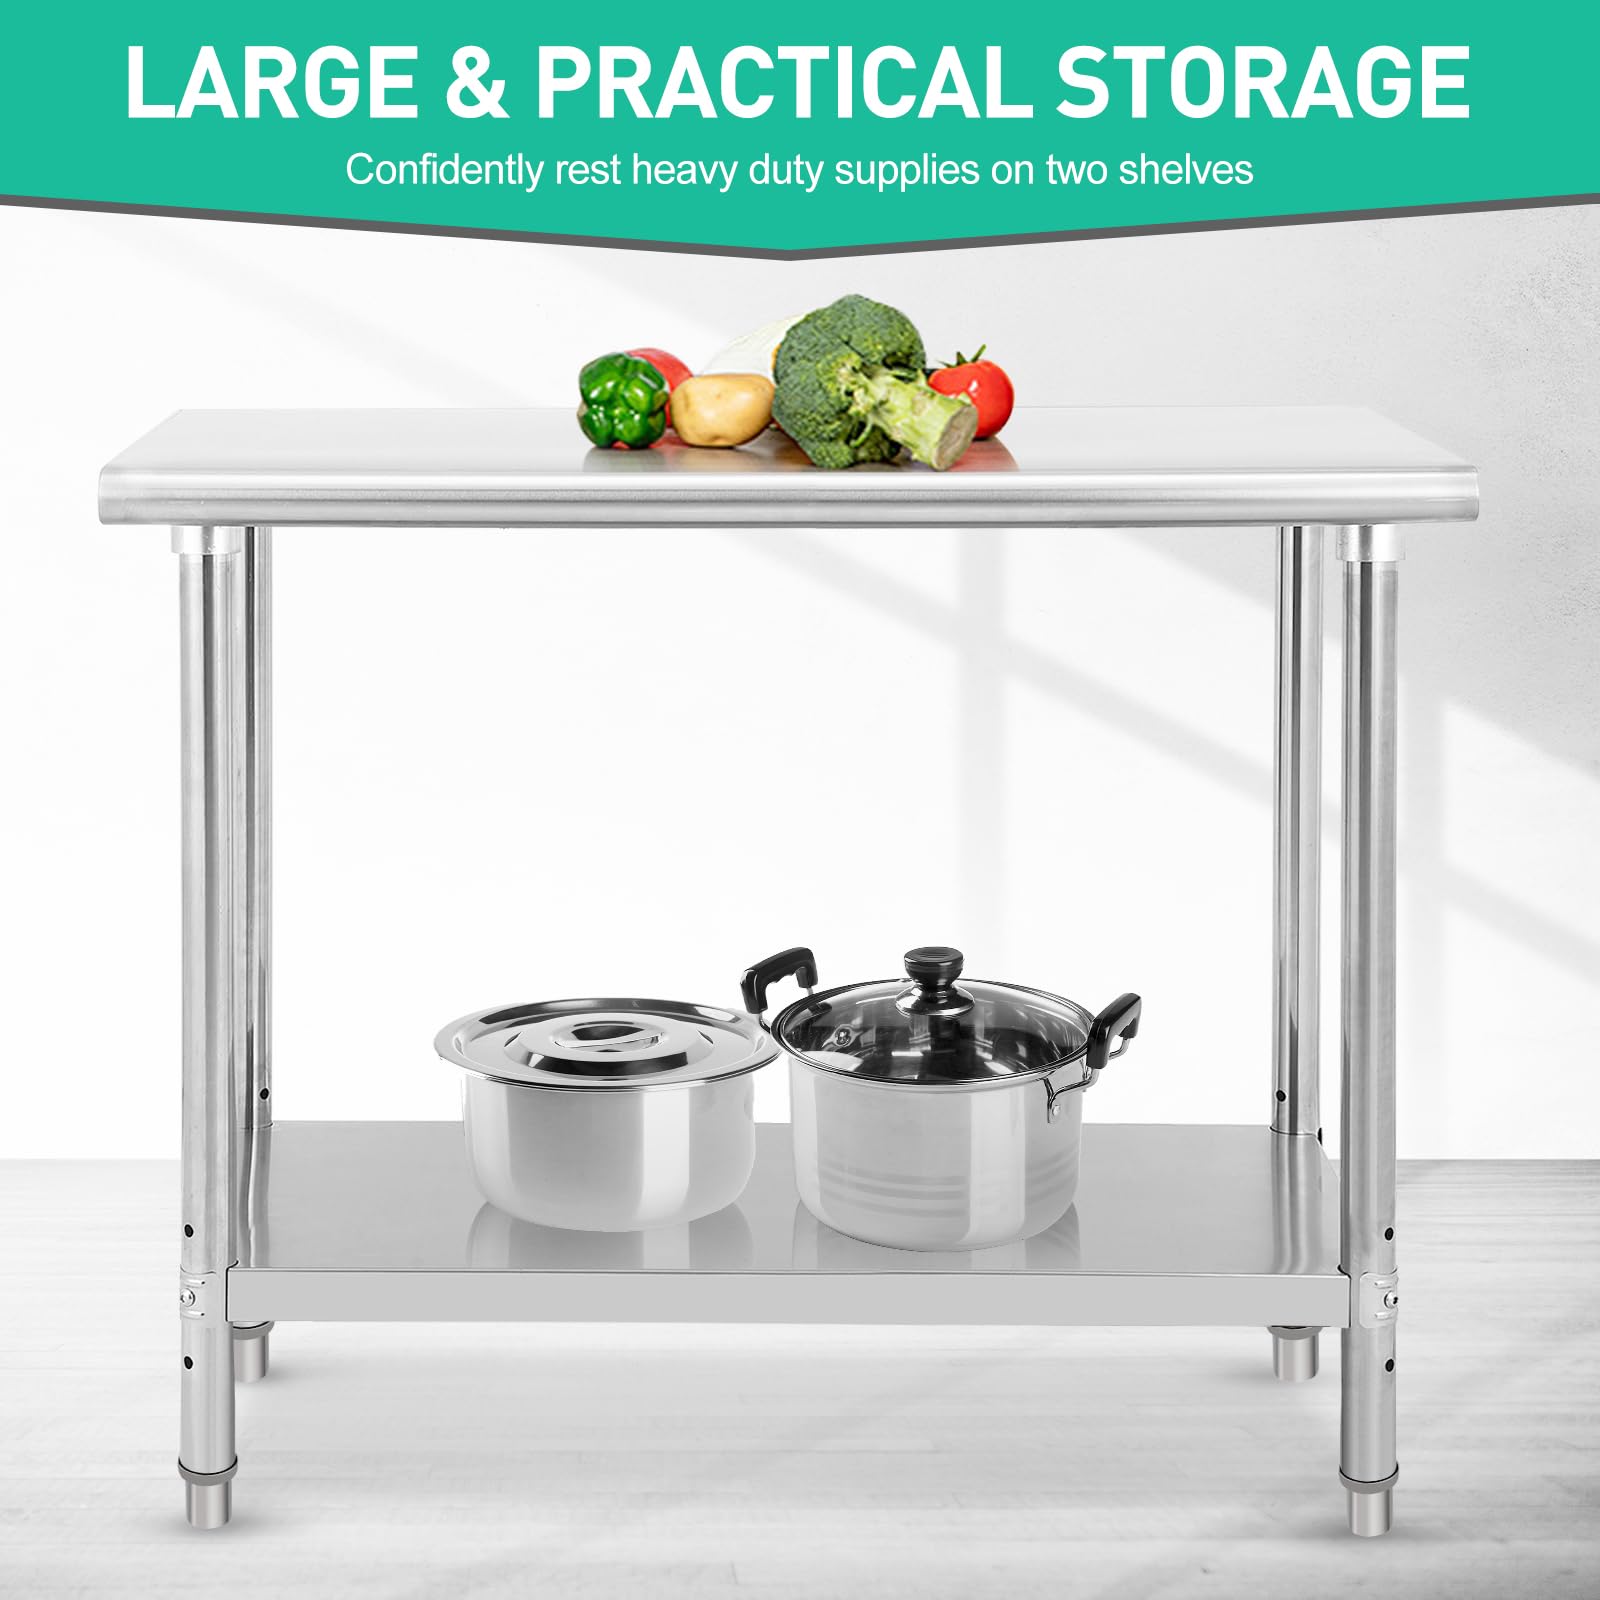 48x30x35 Inch Stainless Steel Table Metal Double Tier Worktable